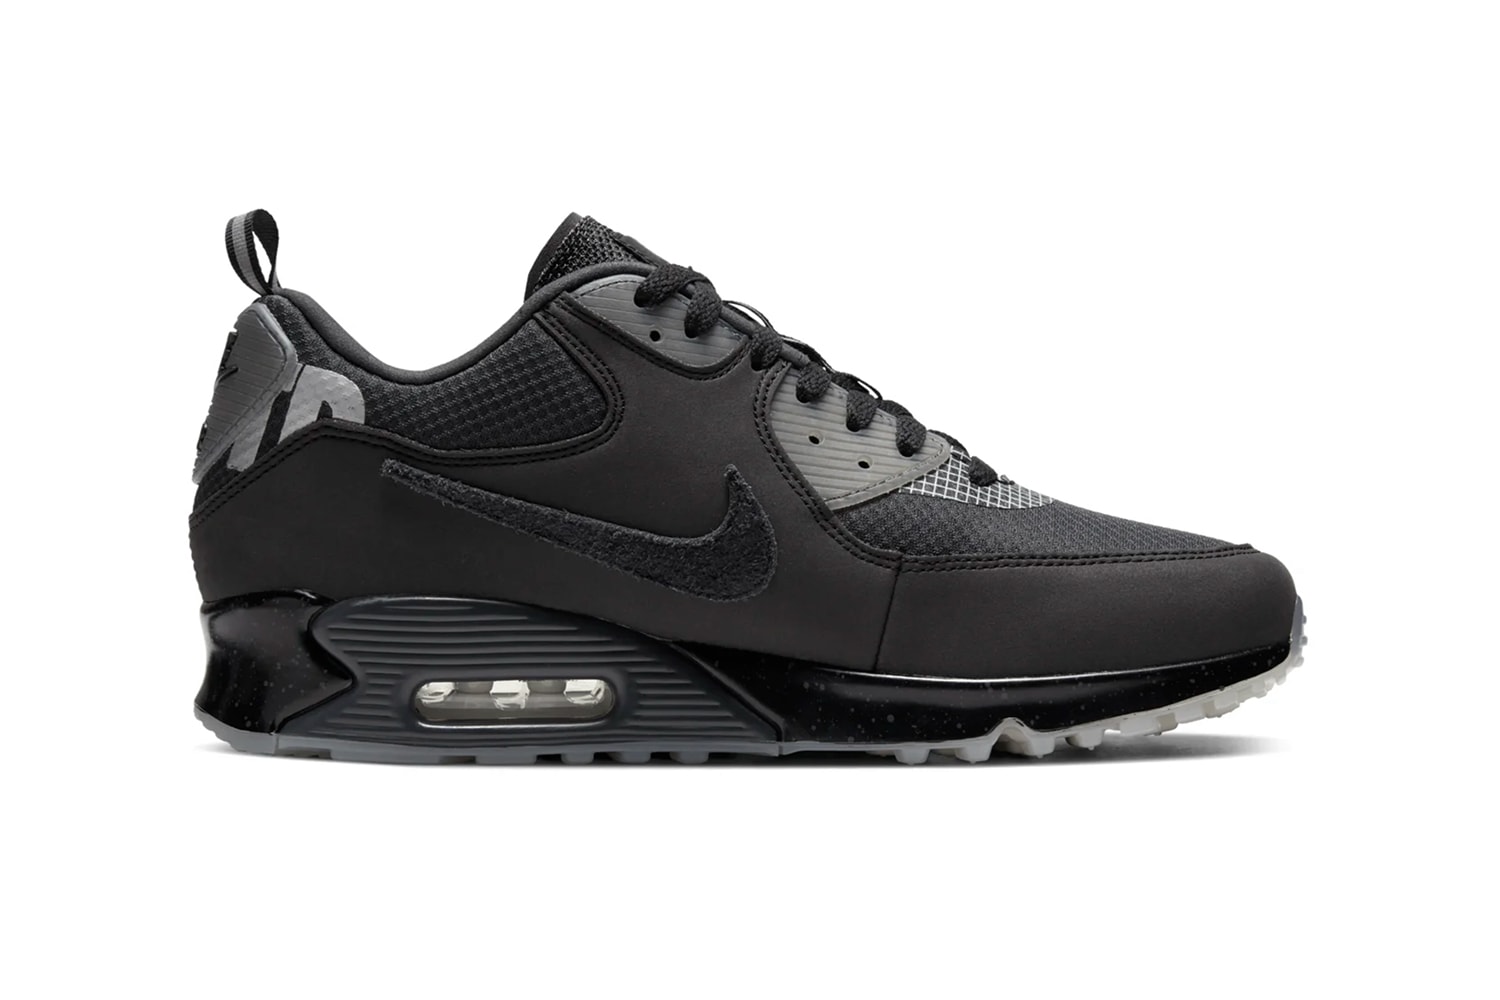 undefeated nike air max 90 Black CQ2289-002 release info Color: Black/Black-Anthracite-Rush Pink AM90 bubble unit drop date price